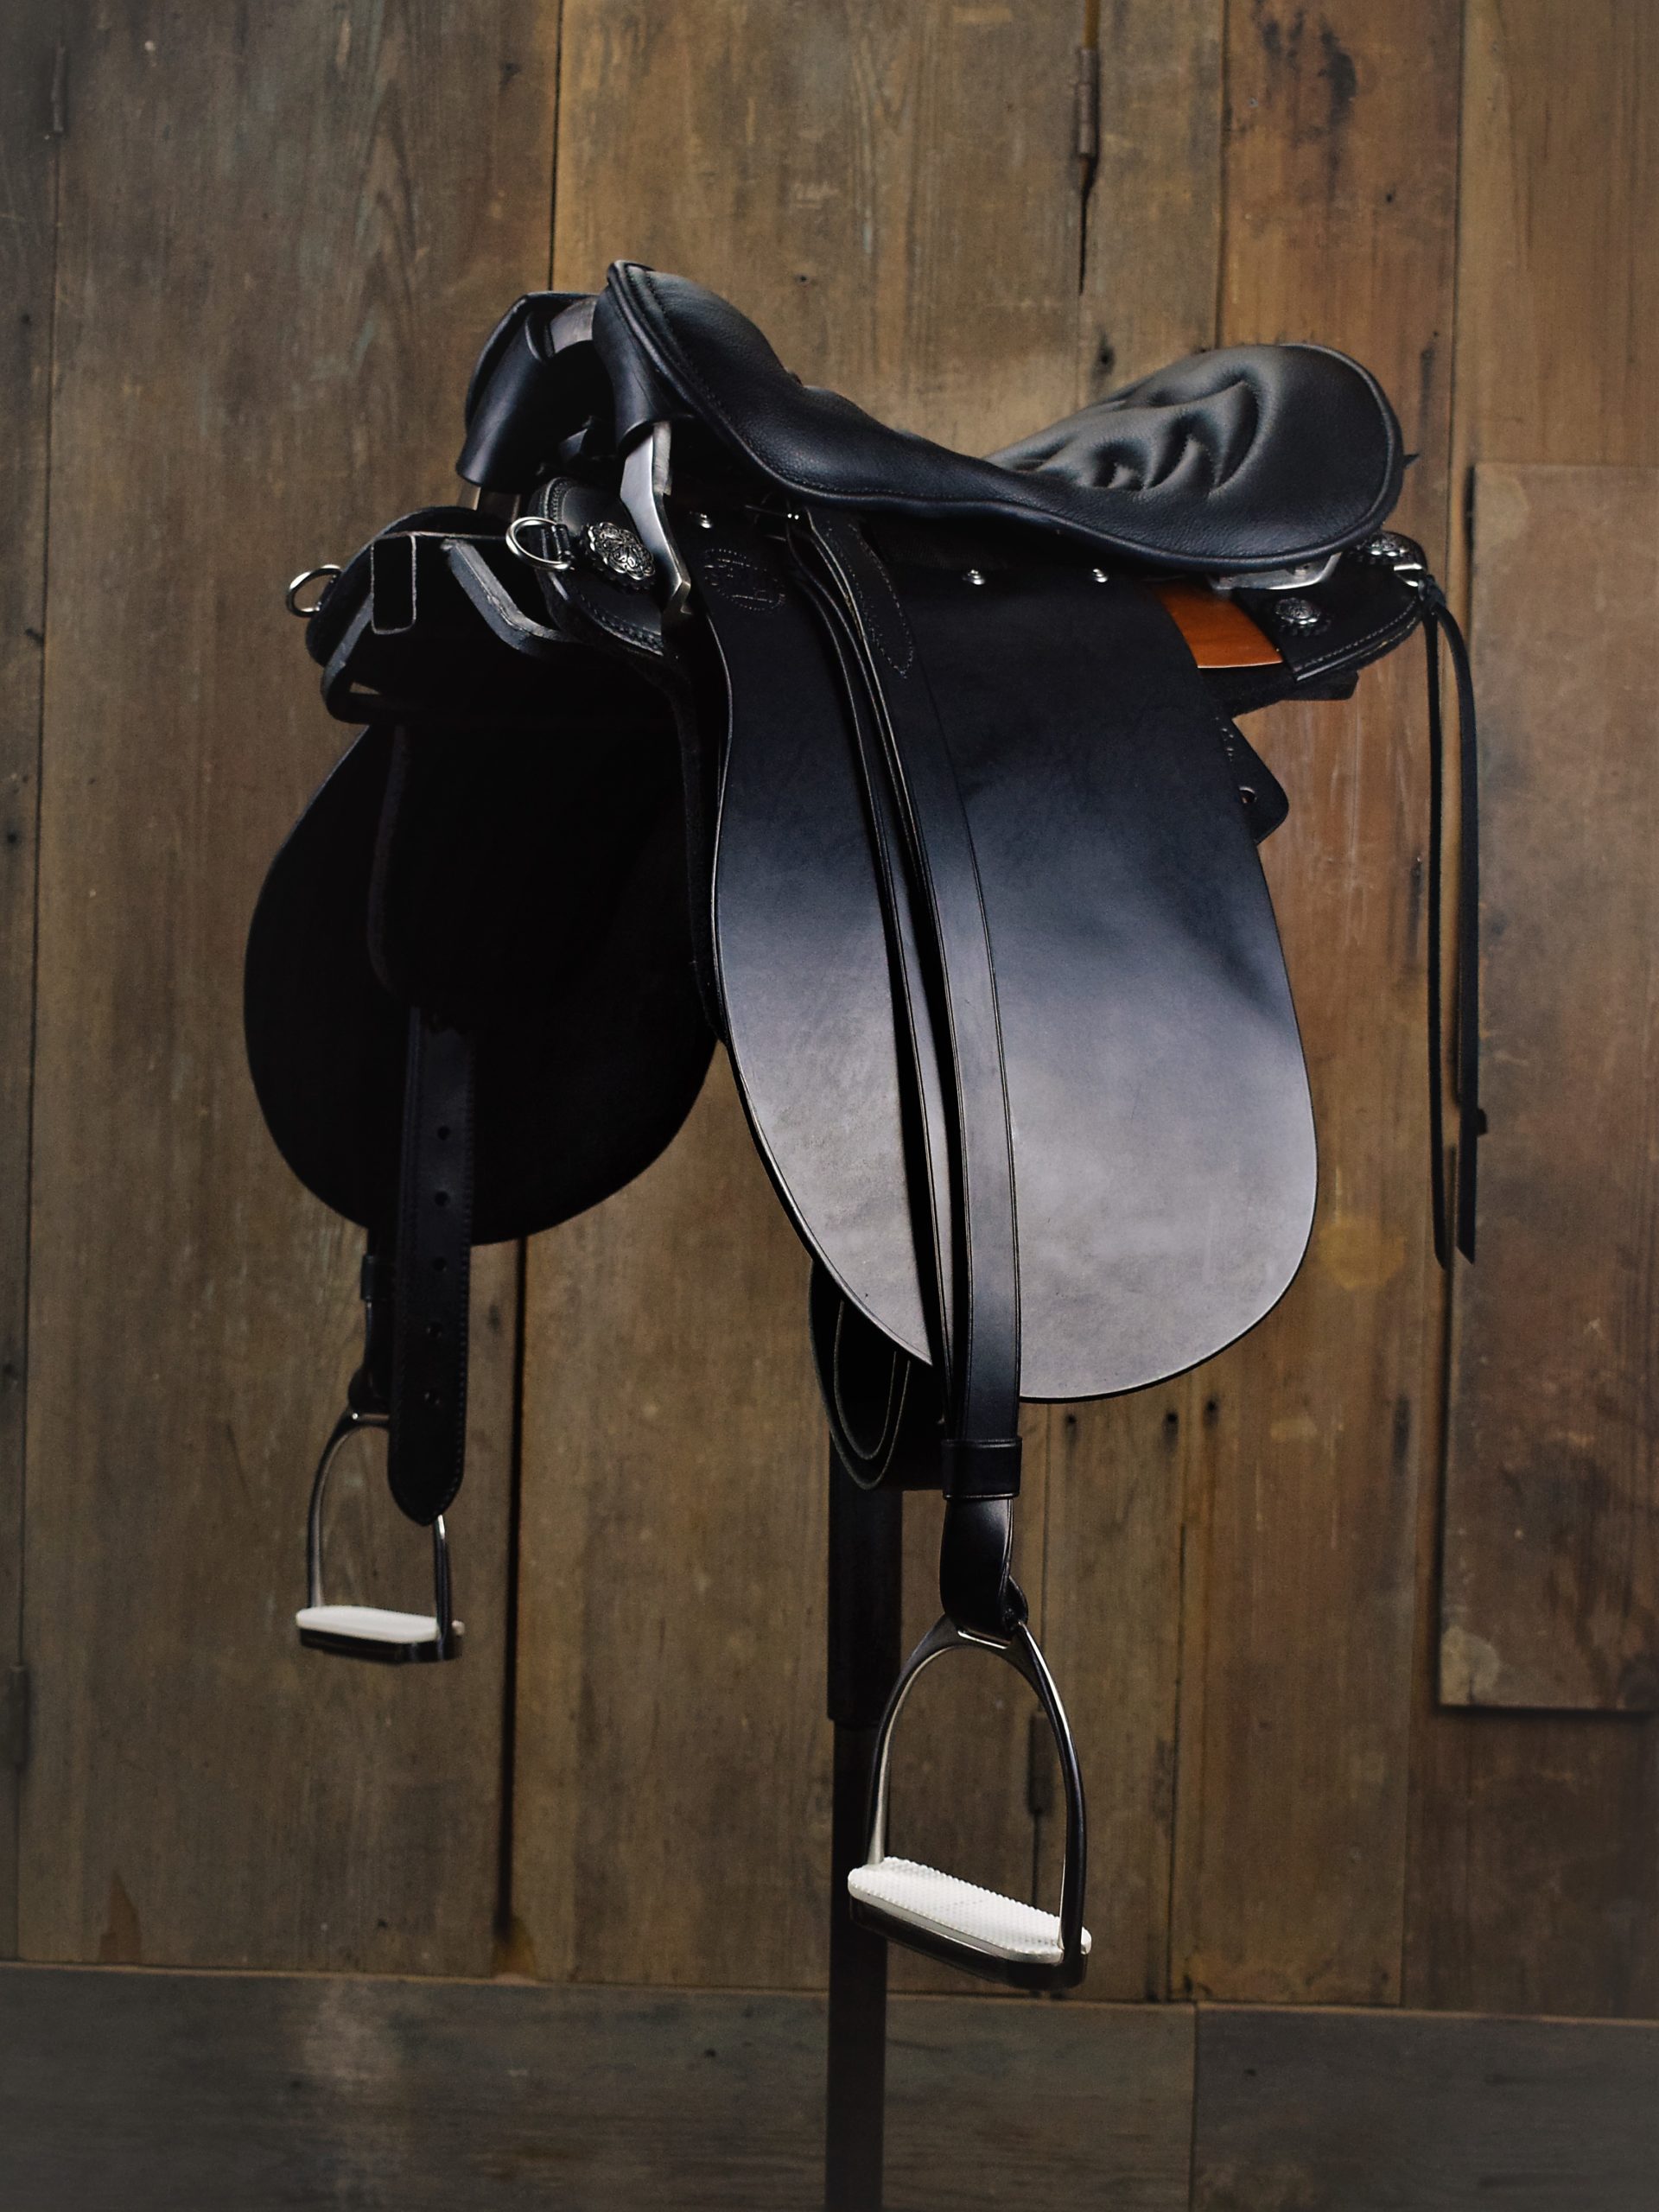 The Mountaineer Show and Trail Saddle